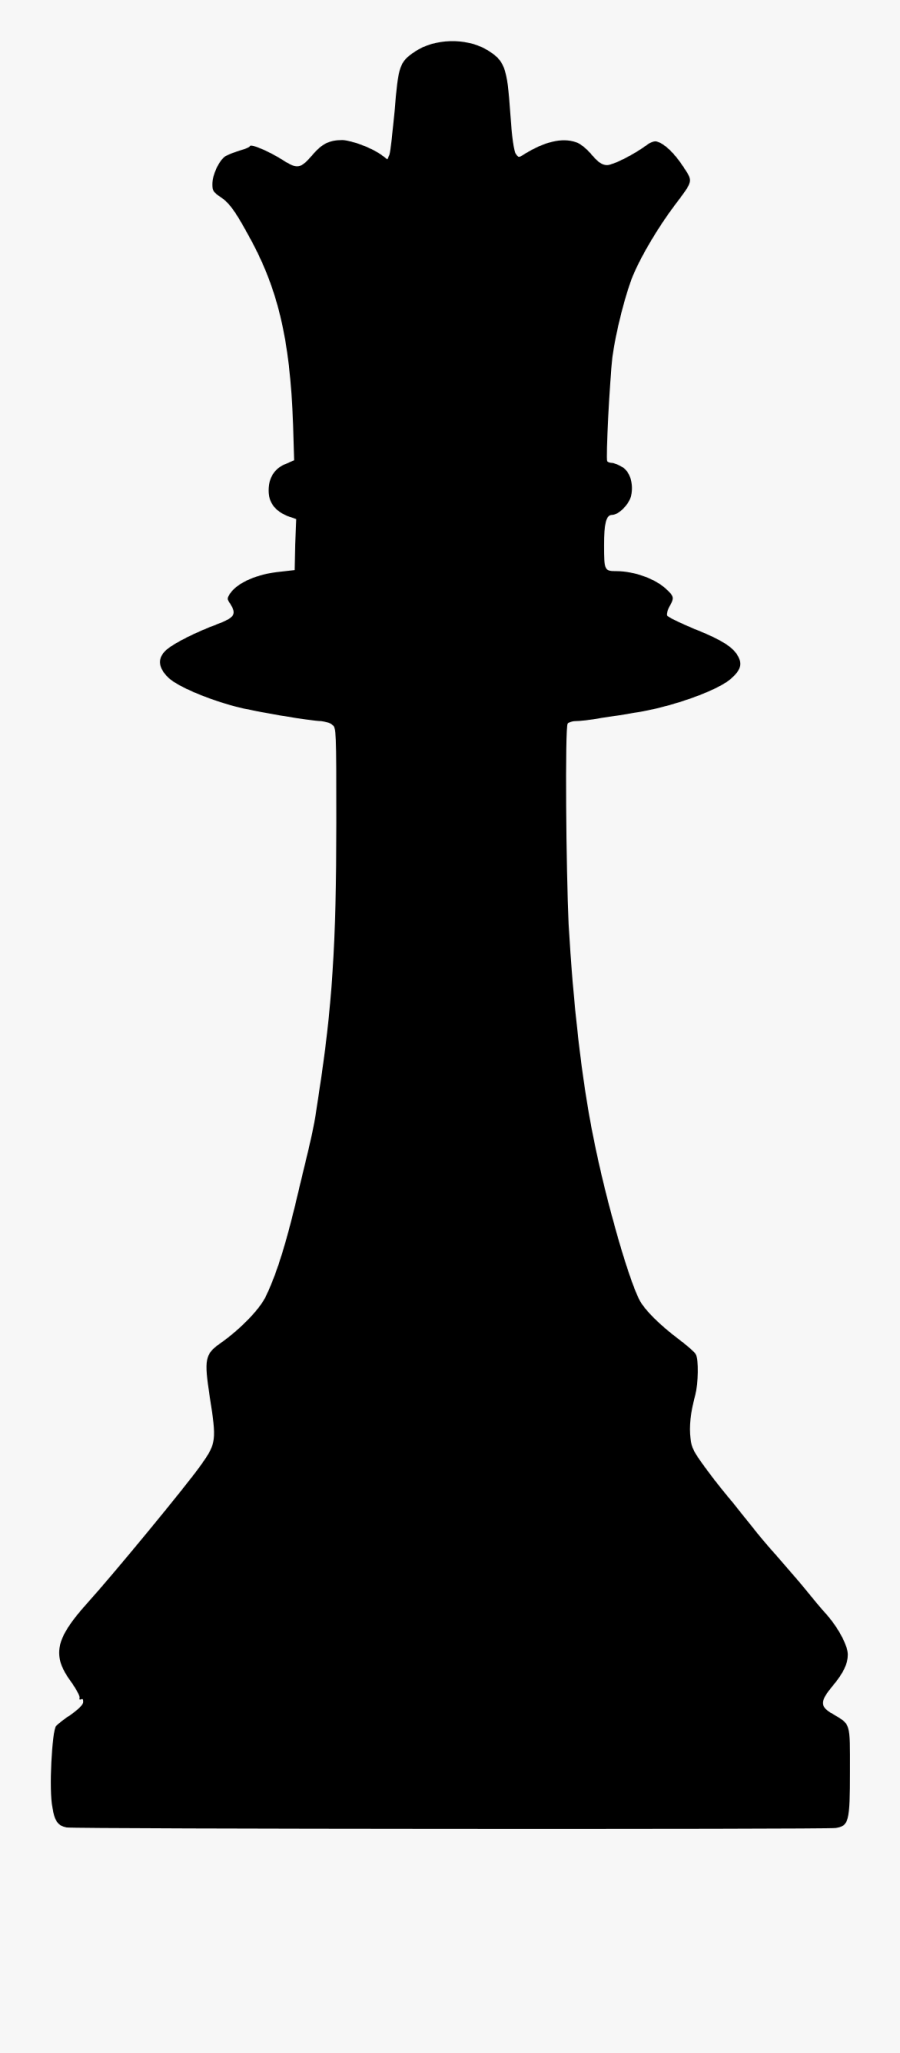 Queen Chess Piece Clipart , Free Transparent Clipart - ClipartKey